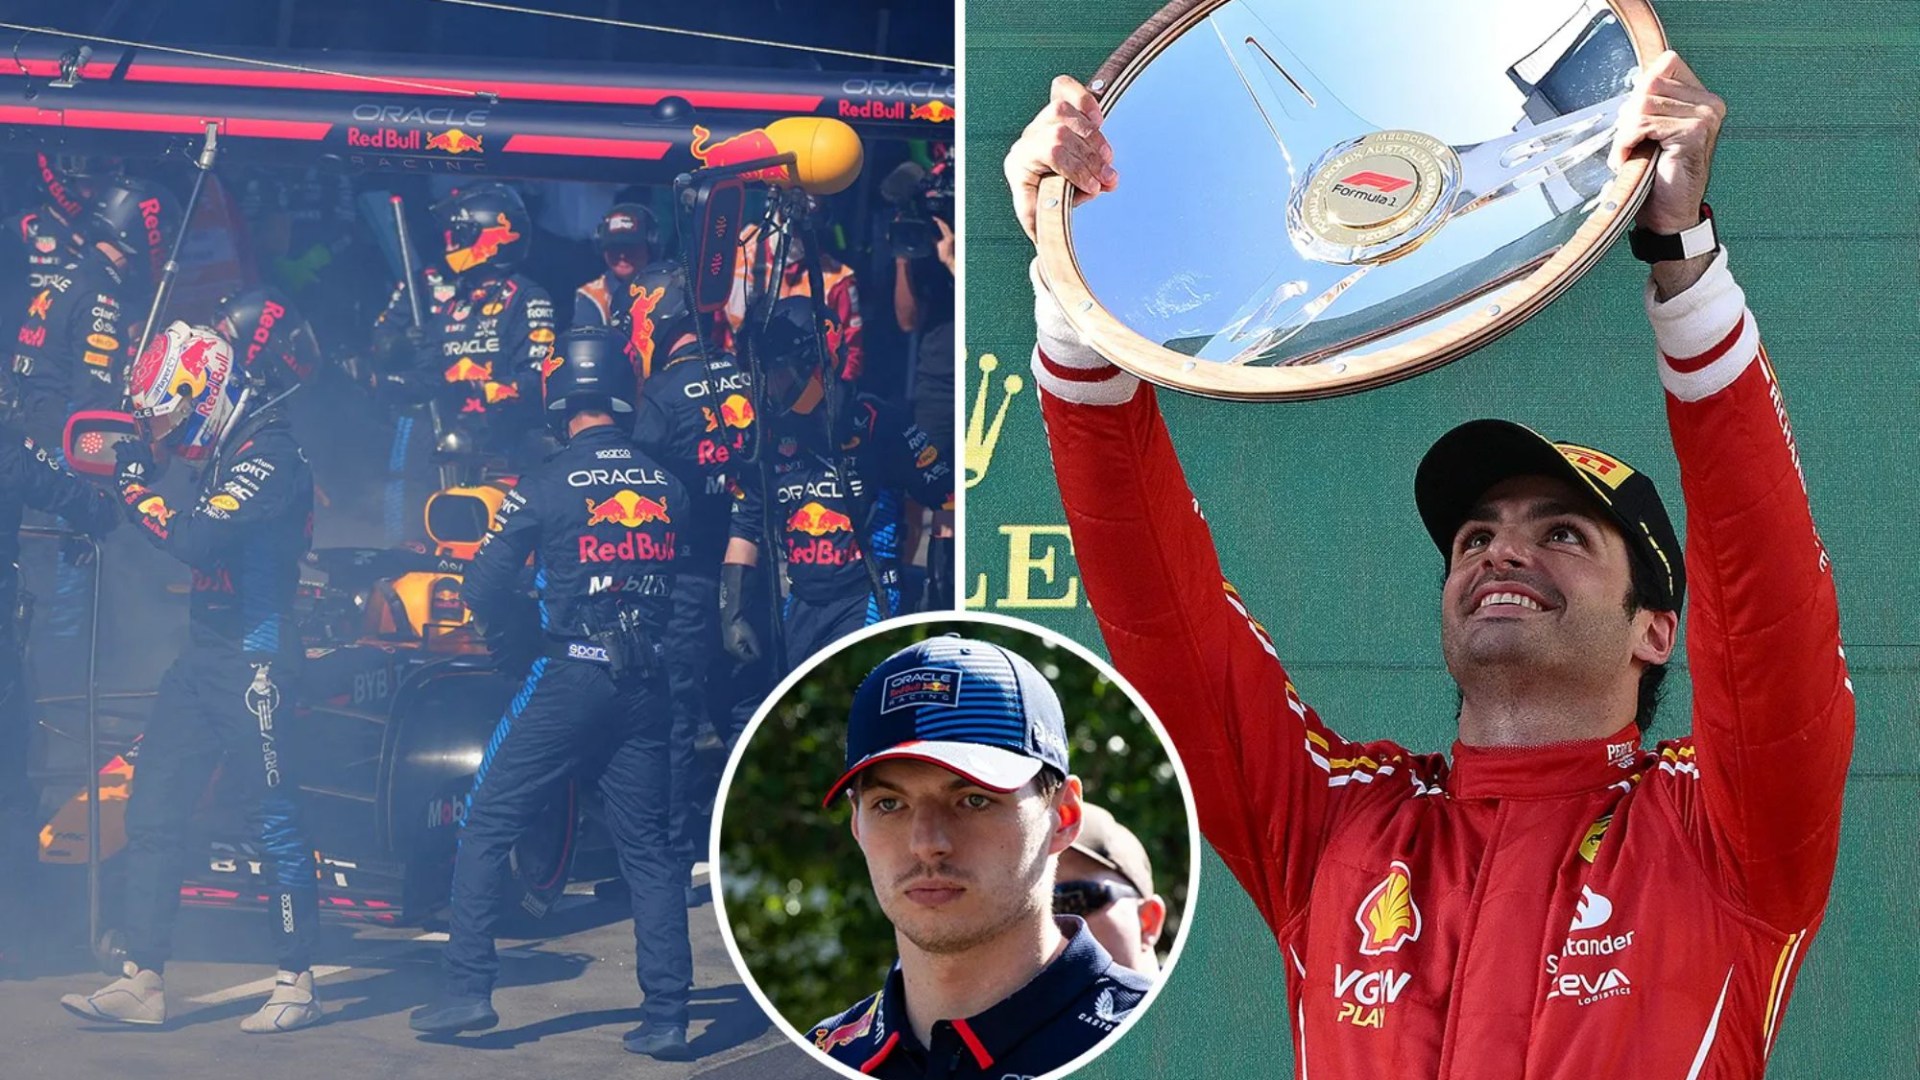 Max Verstappen forced to retire from Australian Grand Prix after car CATCHES FIRE as Carlos Sainz races to victory